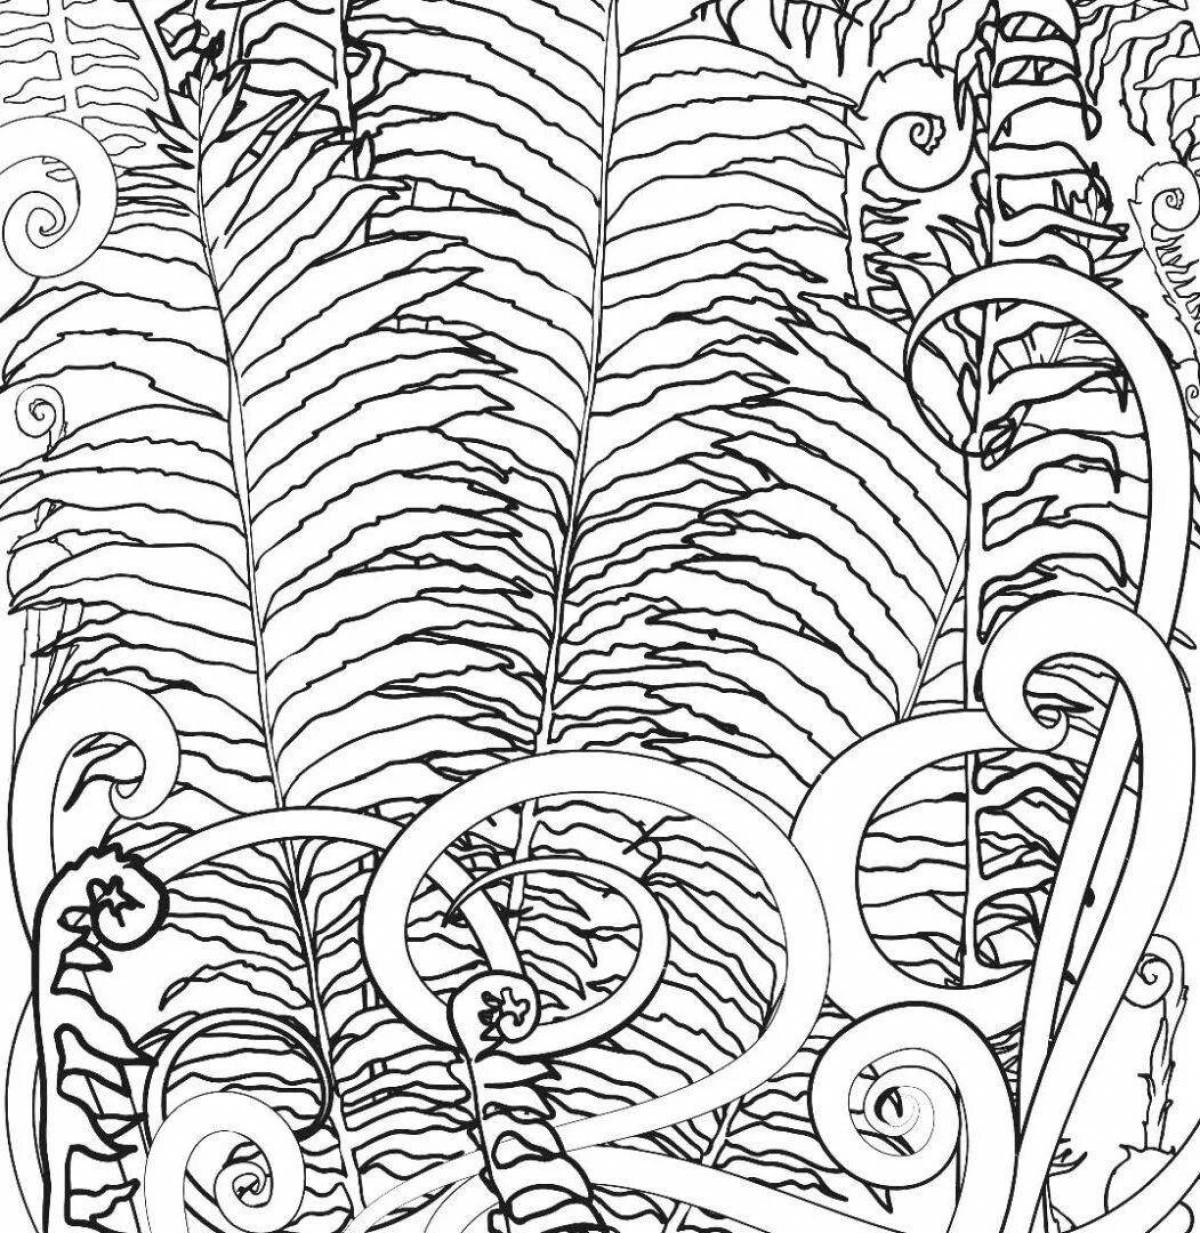 Charming forest coloring page